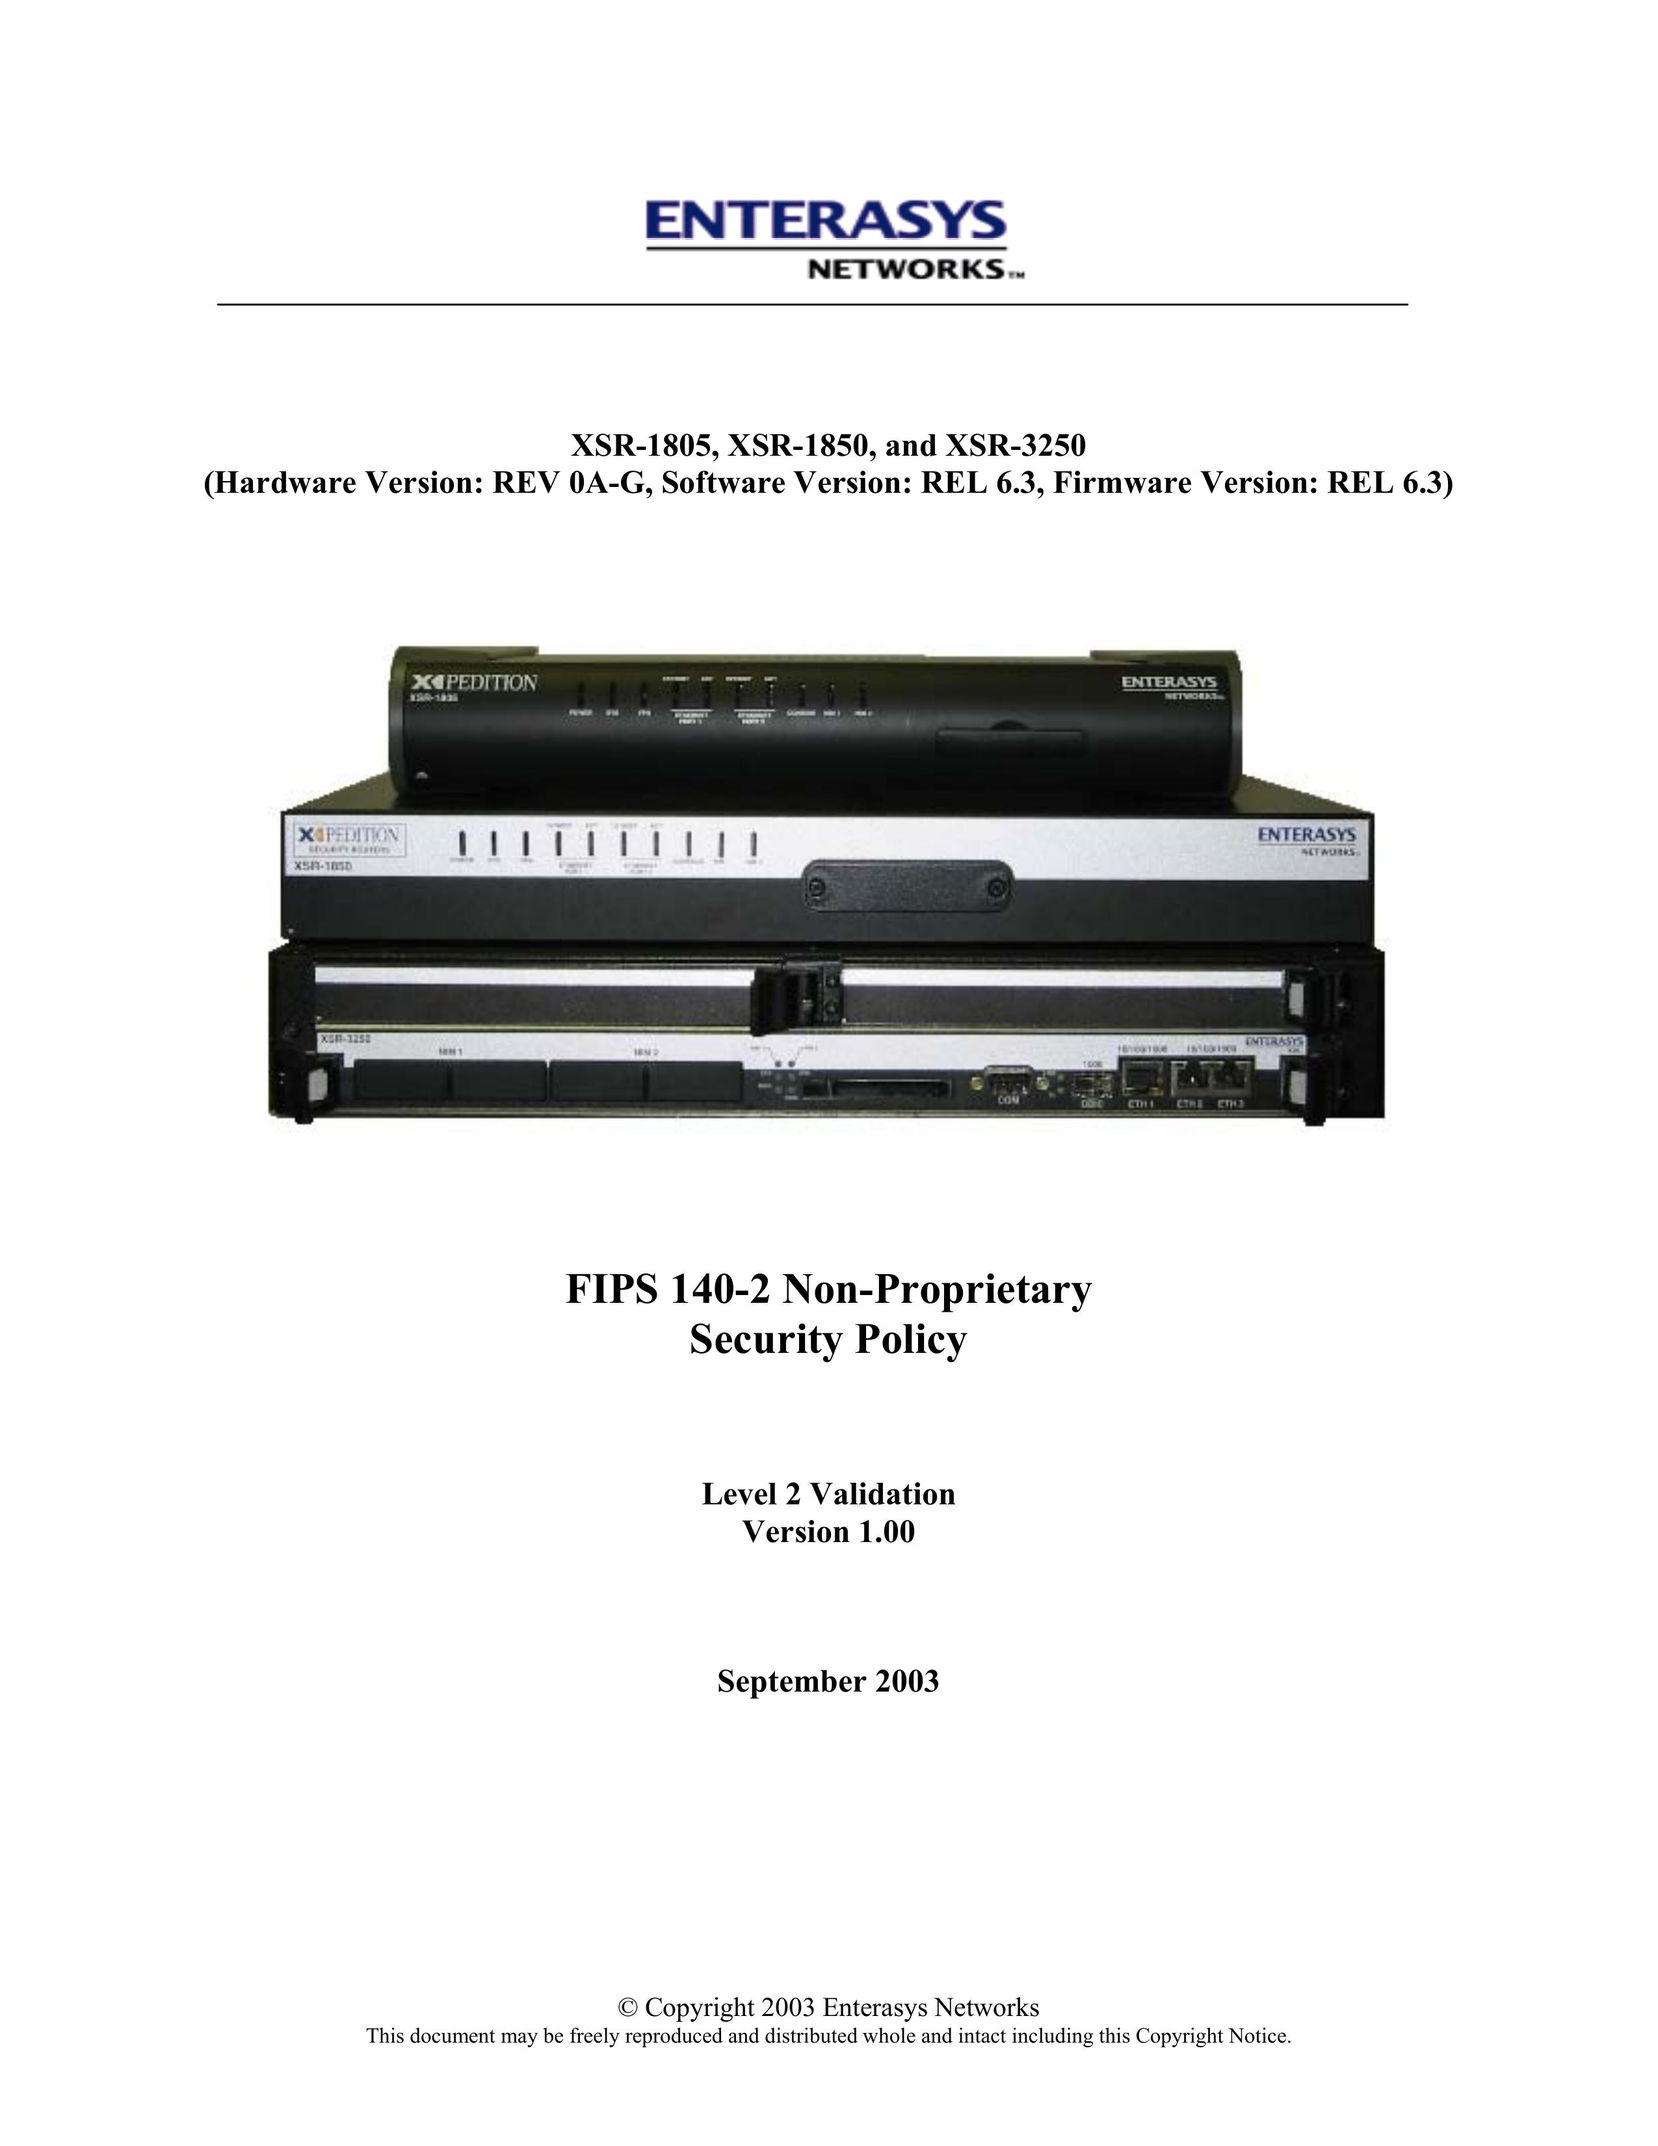 Enterasys Networks XSR-1850 Network Router User Manual